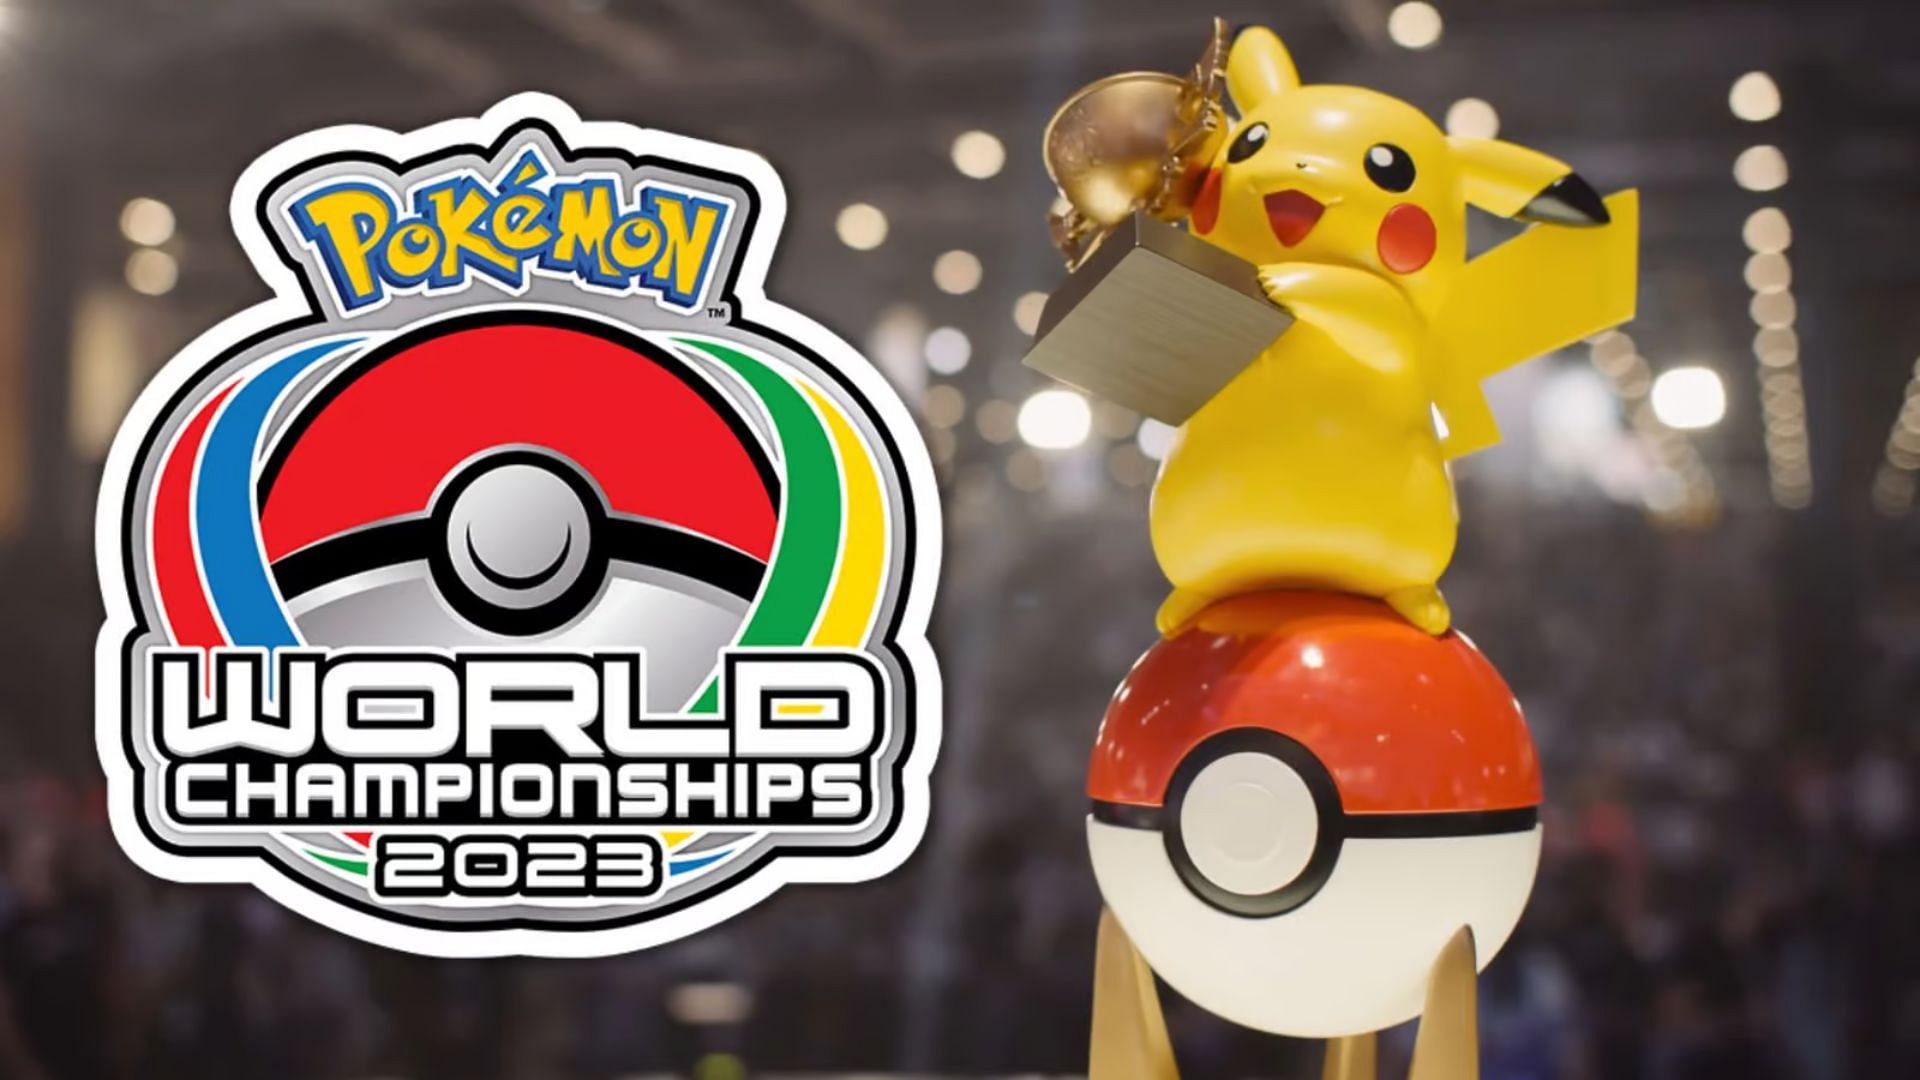 2023 Pokemon World Championships: Prize pool, schedule, in-game